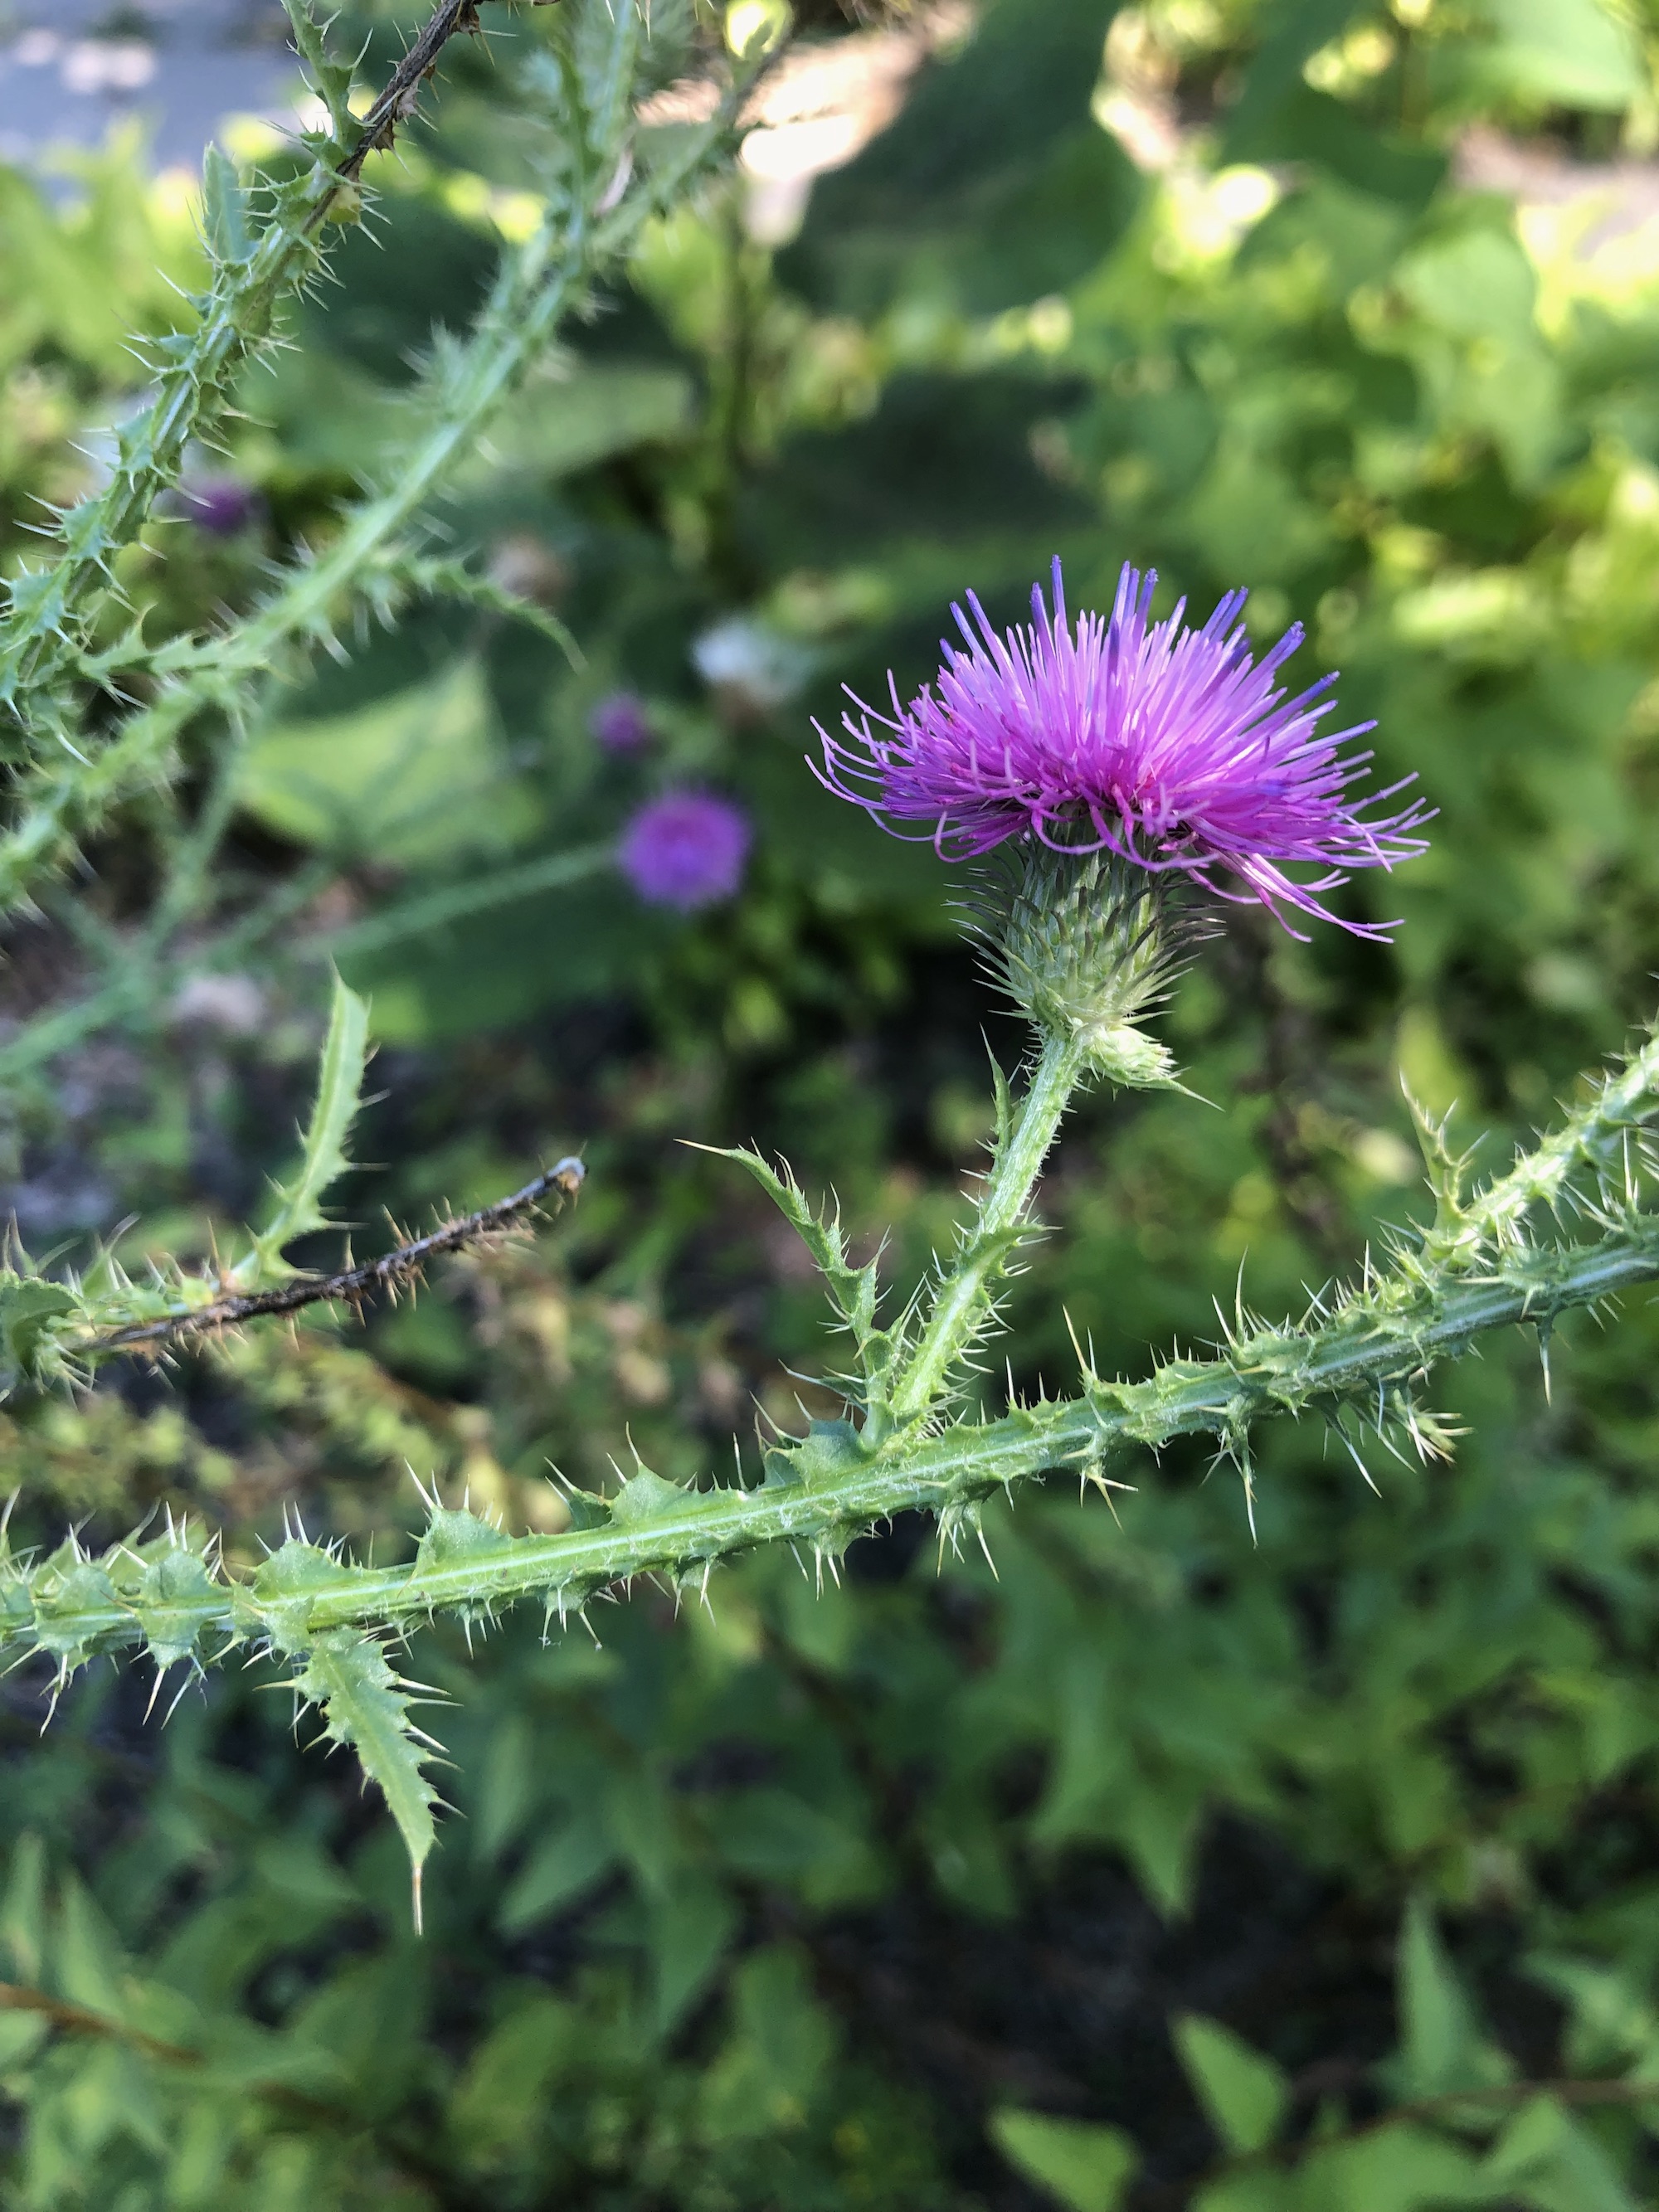 Plumeless Thistle between sidewalk and curb on Tumalo Trail in Madison, Wisconsin on August 16, 2022.